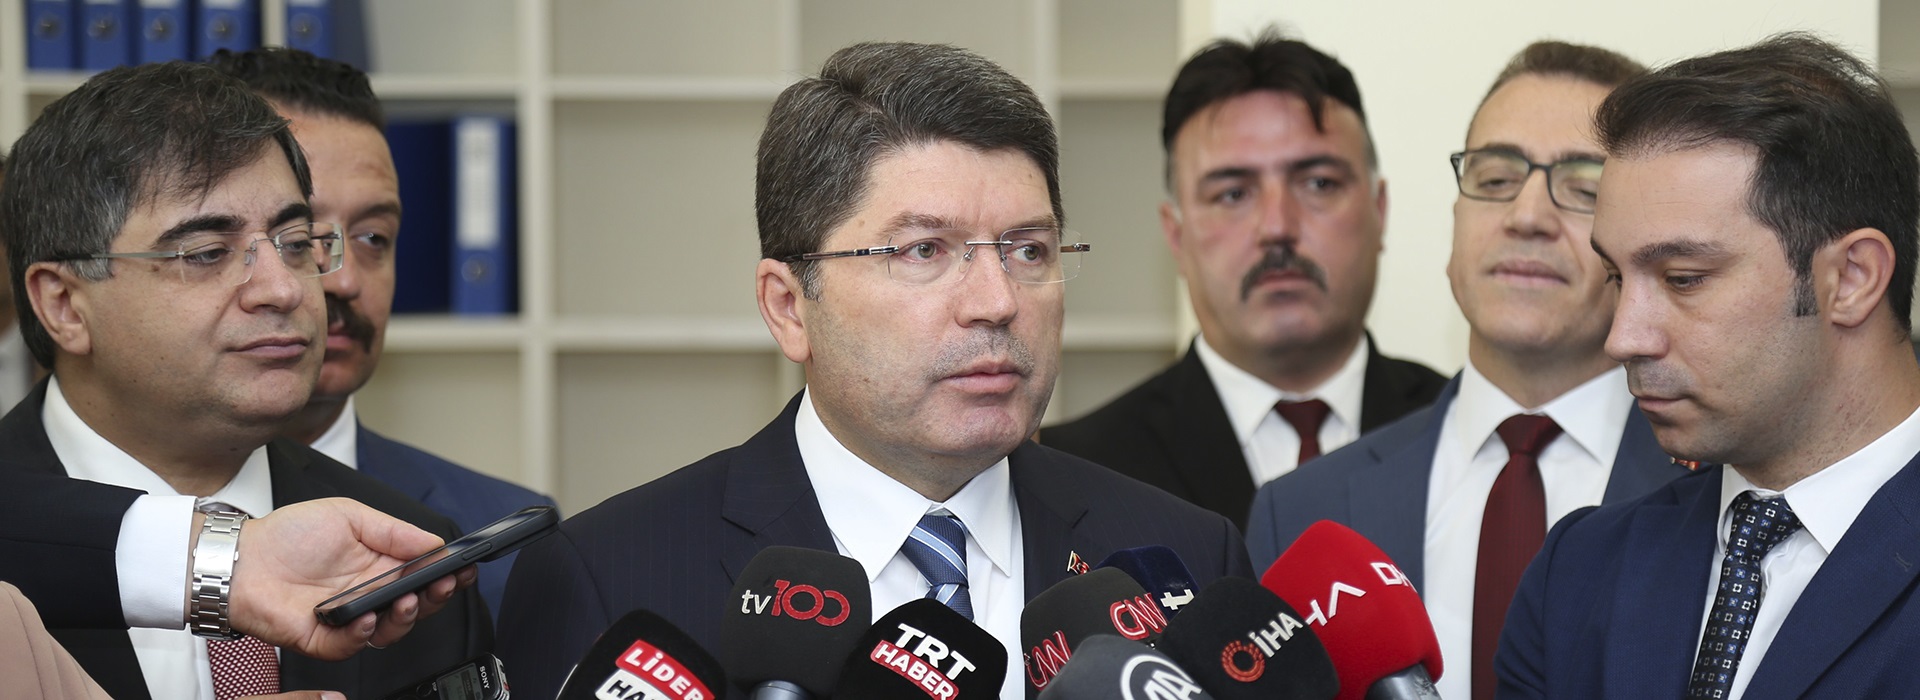 MINISTER TUNÇ: IT IS UNACCEPTABLE FOR ANYONE TO DEFAME TURKISH SOLDIERS AND ARMY  Duyuru Görseli